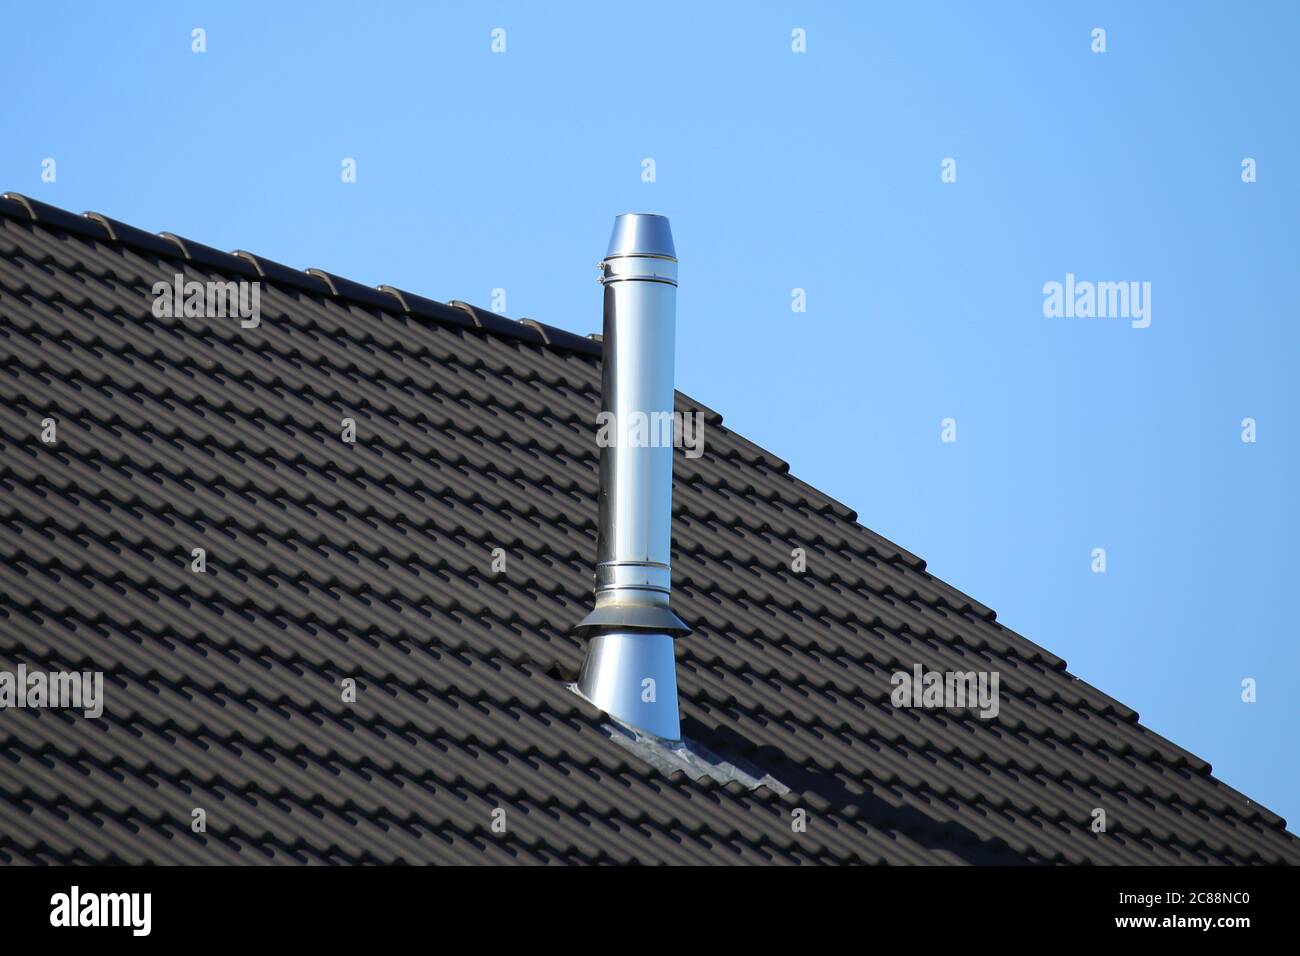 Stainless steel chimney on a new residential home Stock Photo